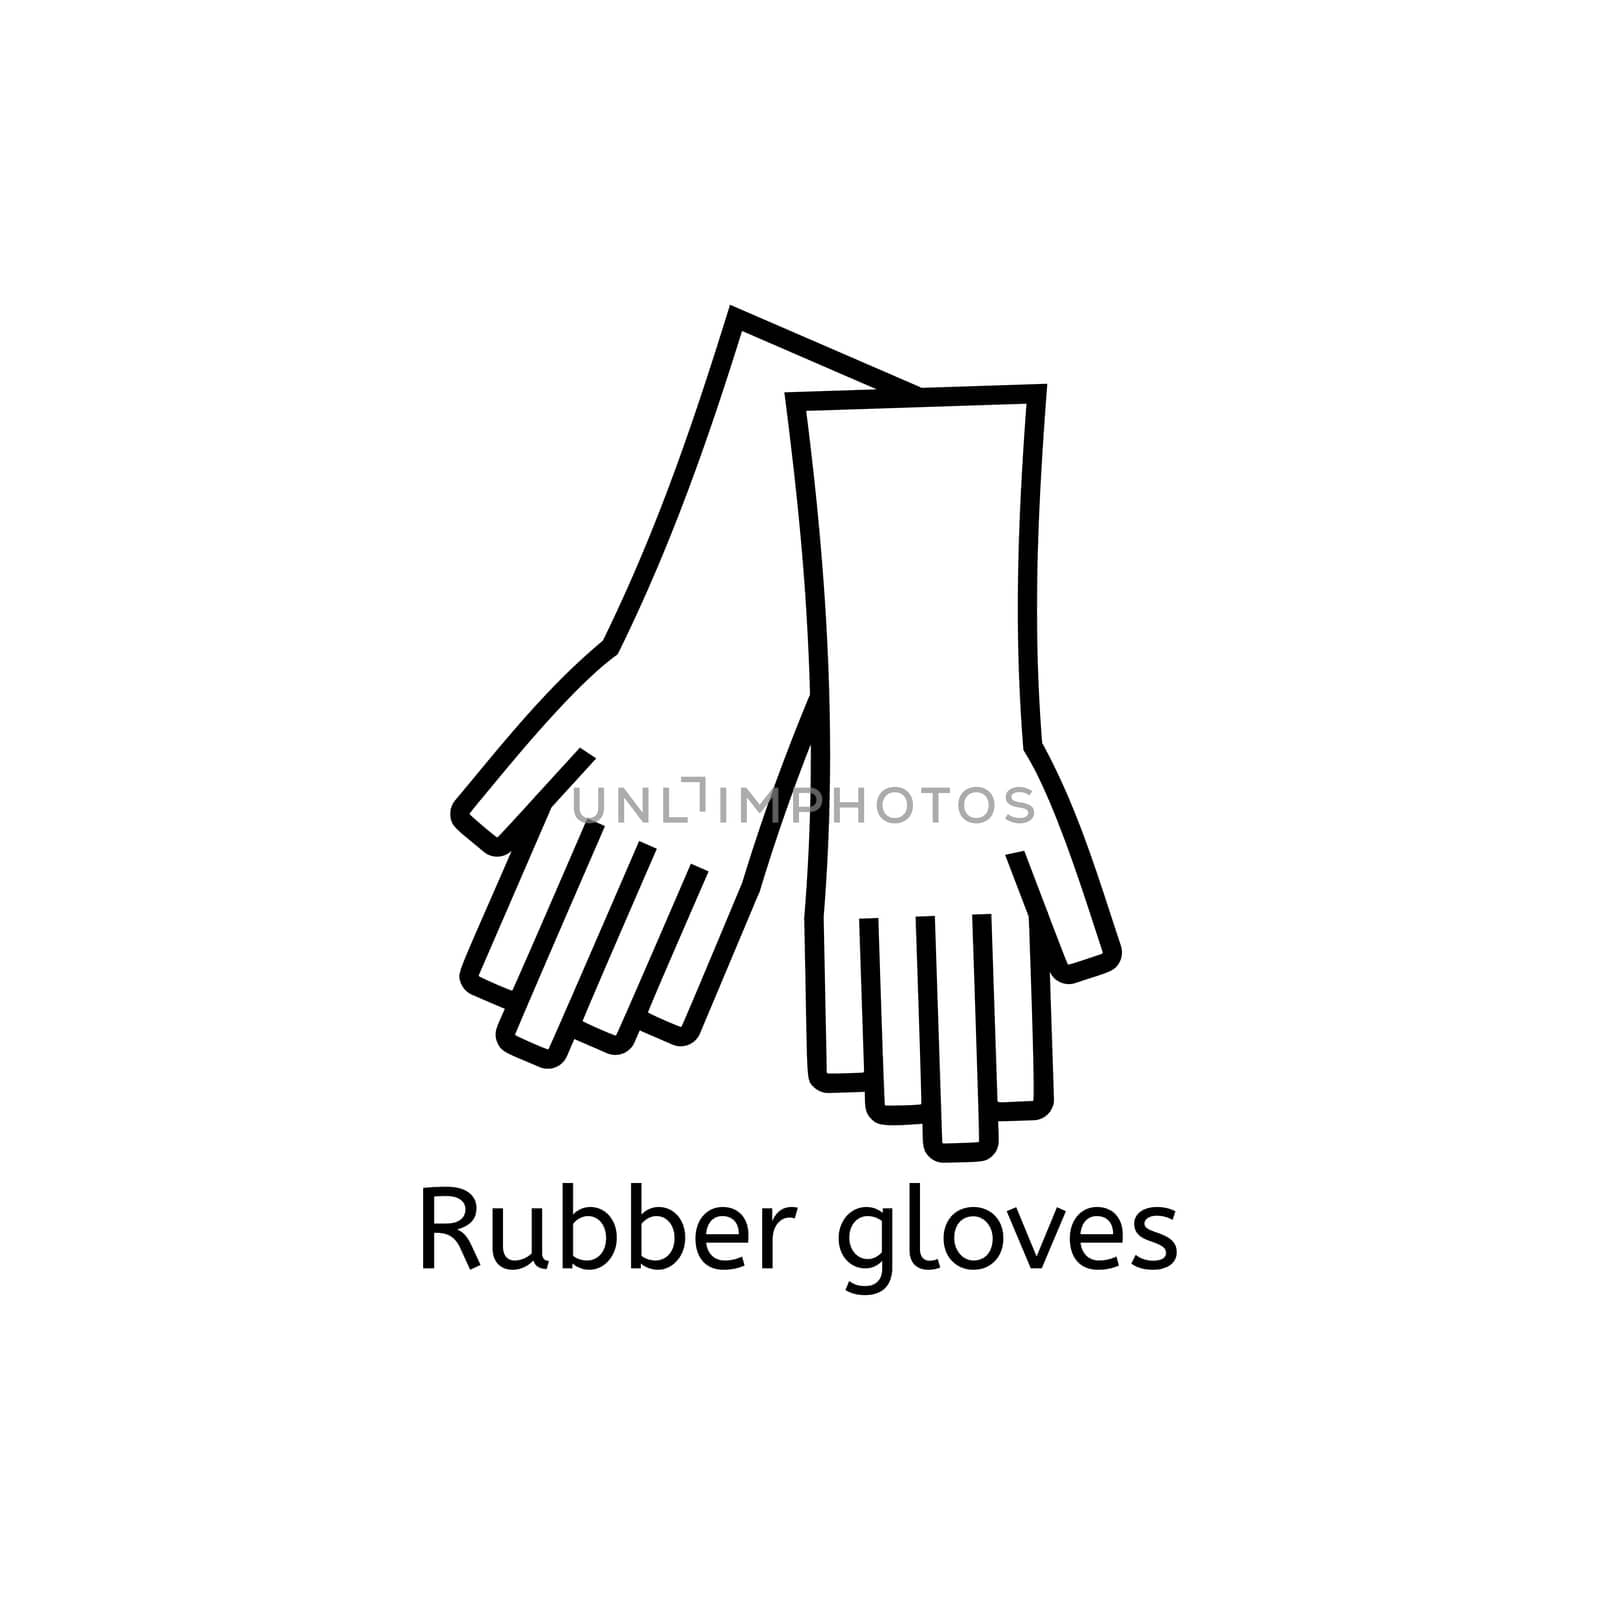 Rubber gloves simple line icon. Protective medical latex glovev thin linear signs. Concept for websites, infographic, mobile applications. by Elena_Garder